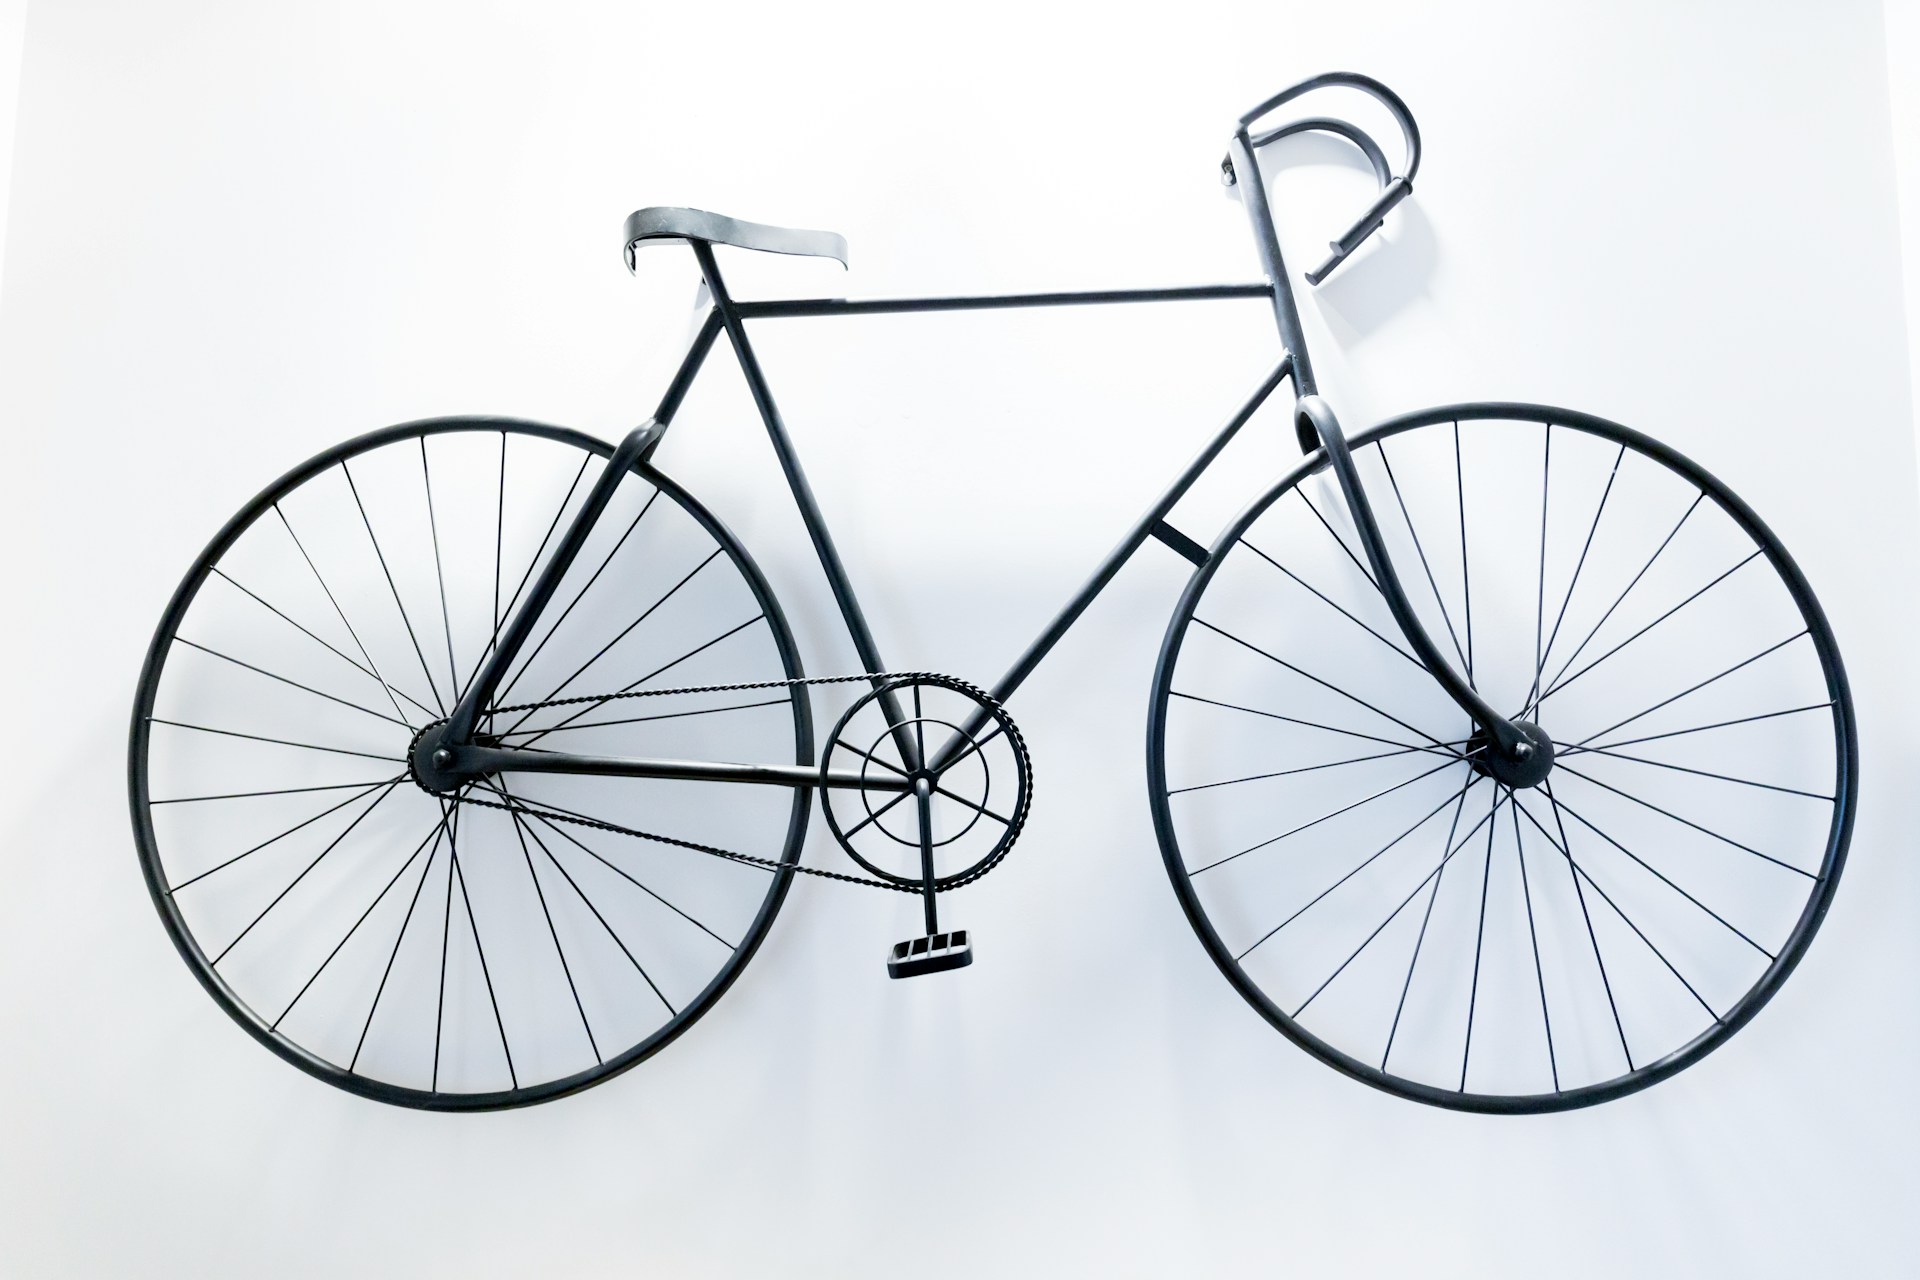 A simple bicycle.